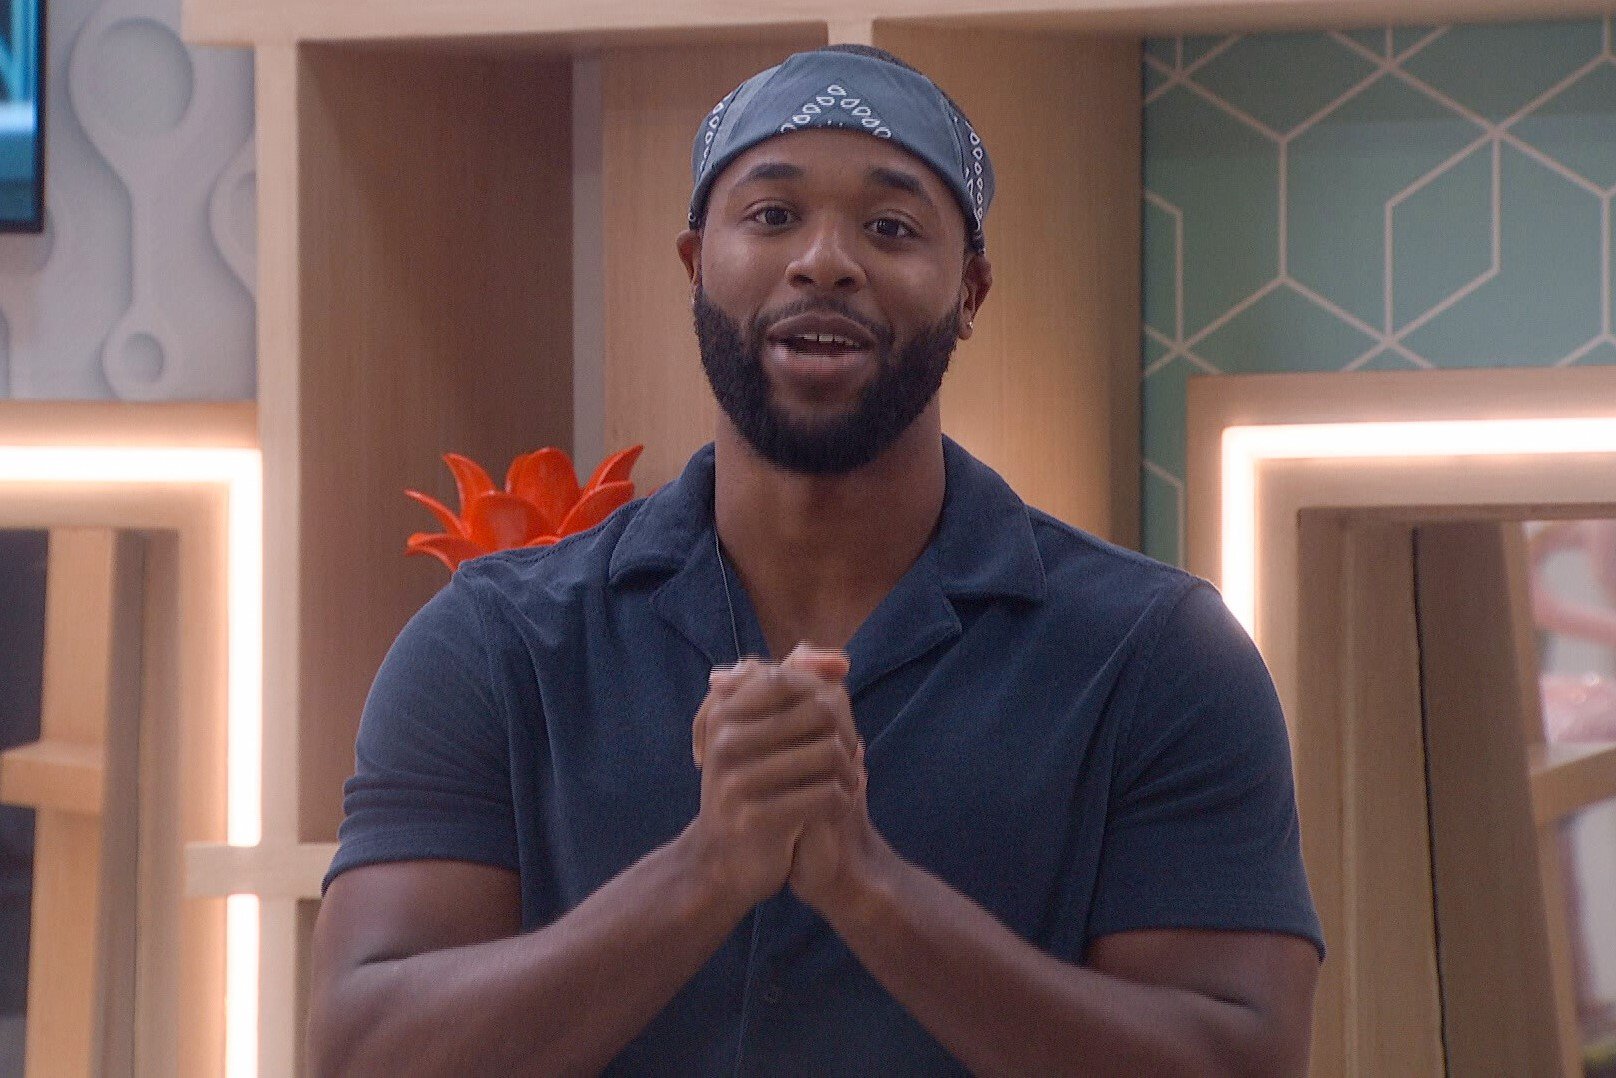 Monte Taylor, who, according to 'Big Brother 24' spoilers secured his spot in the final three,